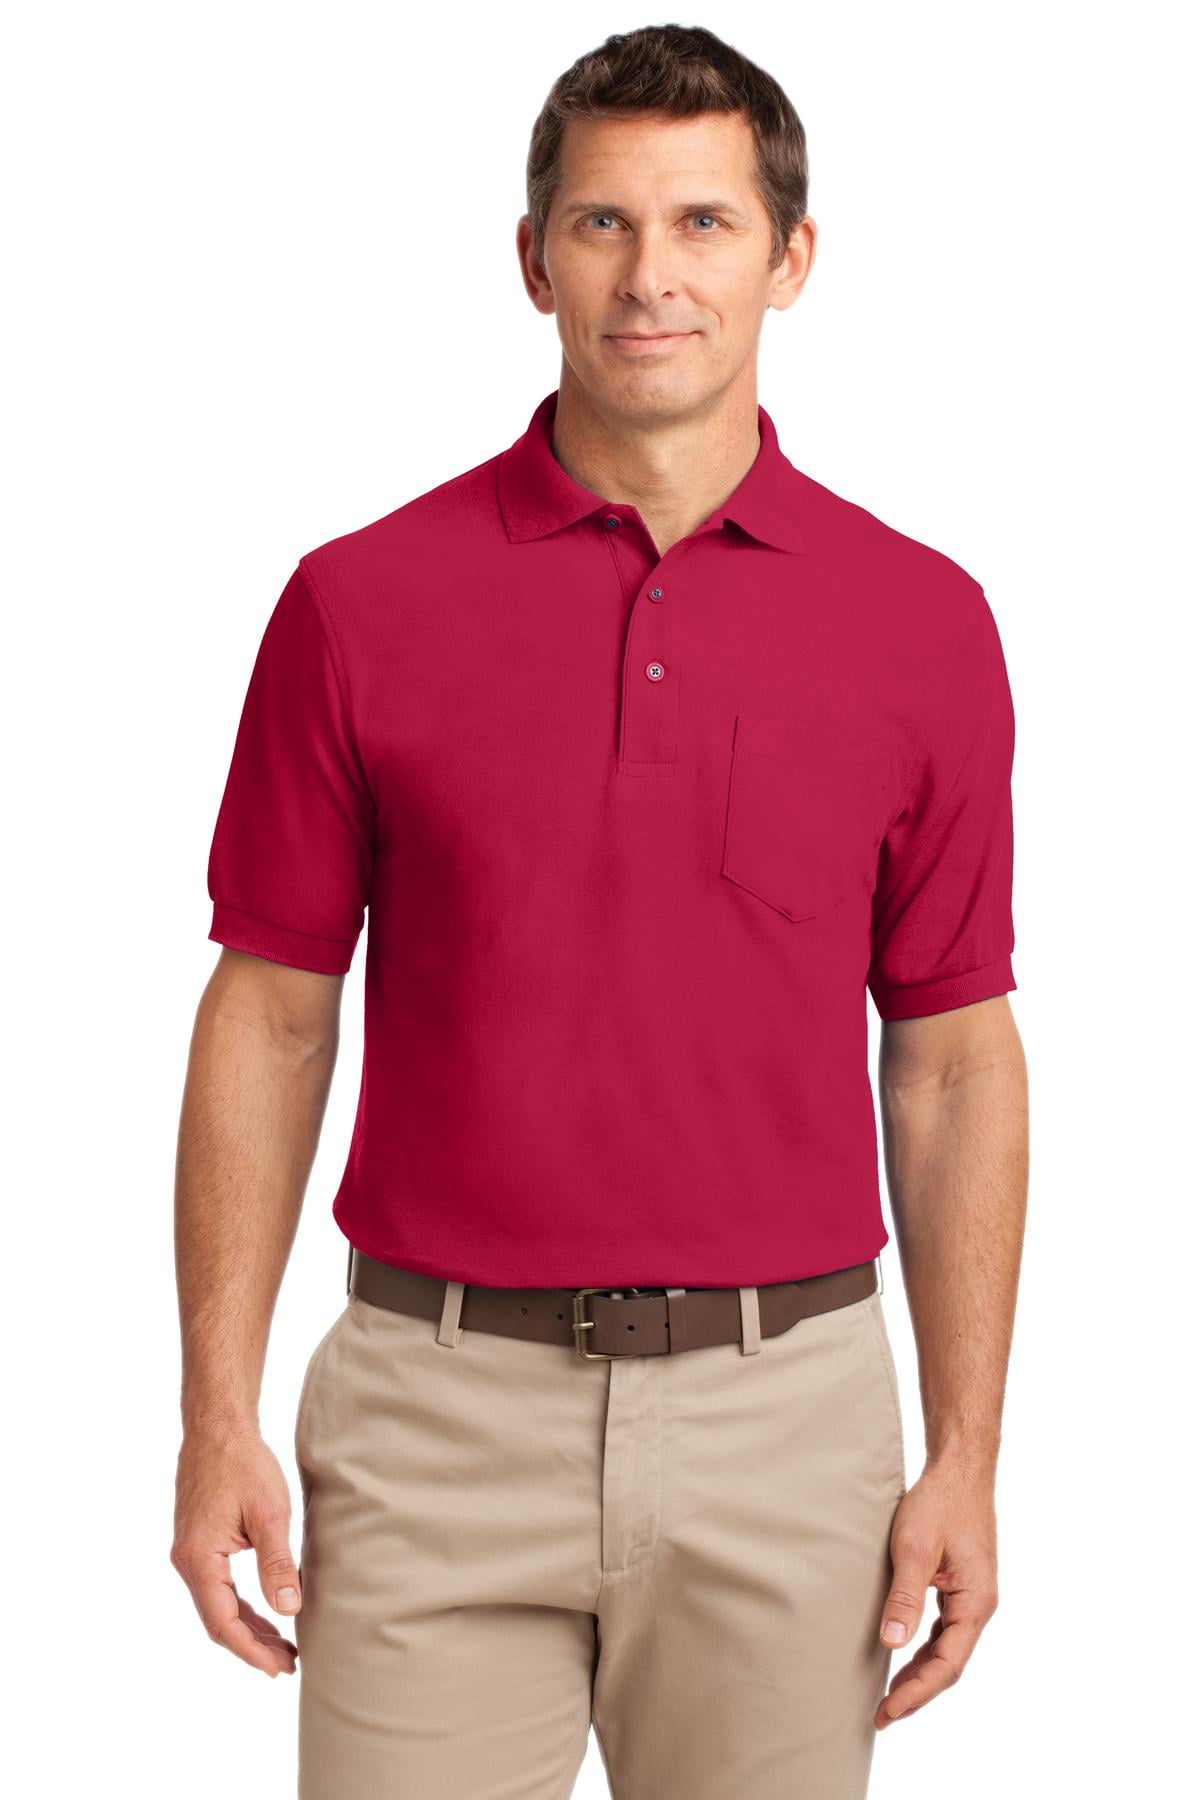 Port Authority Silk Touch Polo with Pocket K500P Mens 